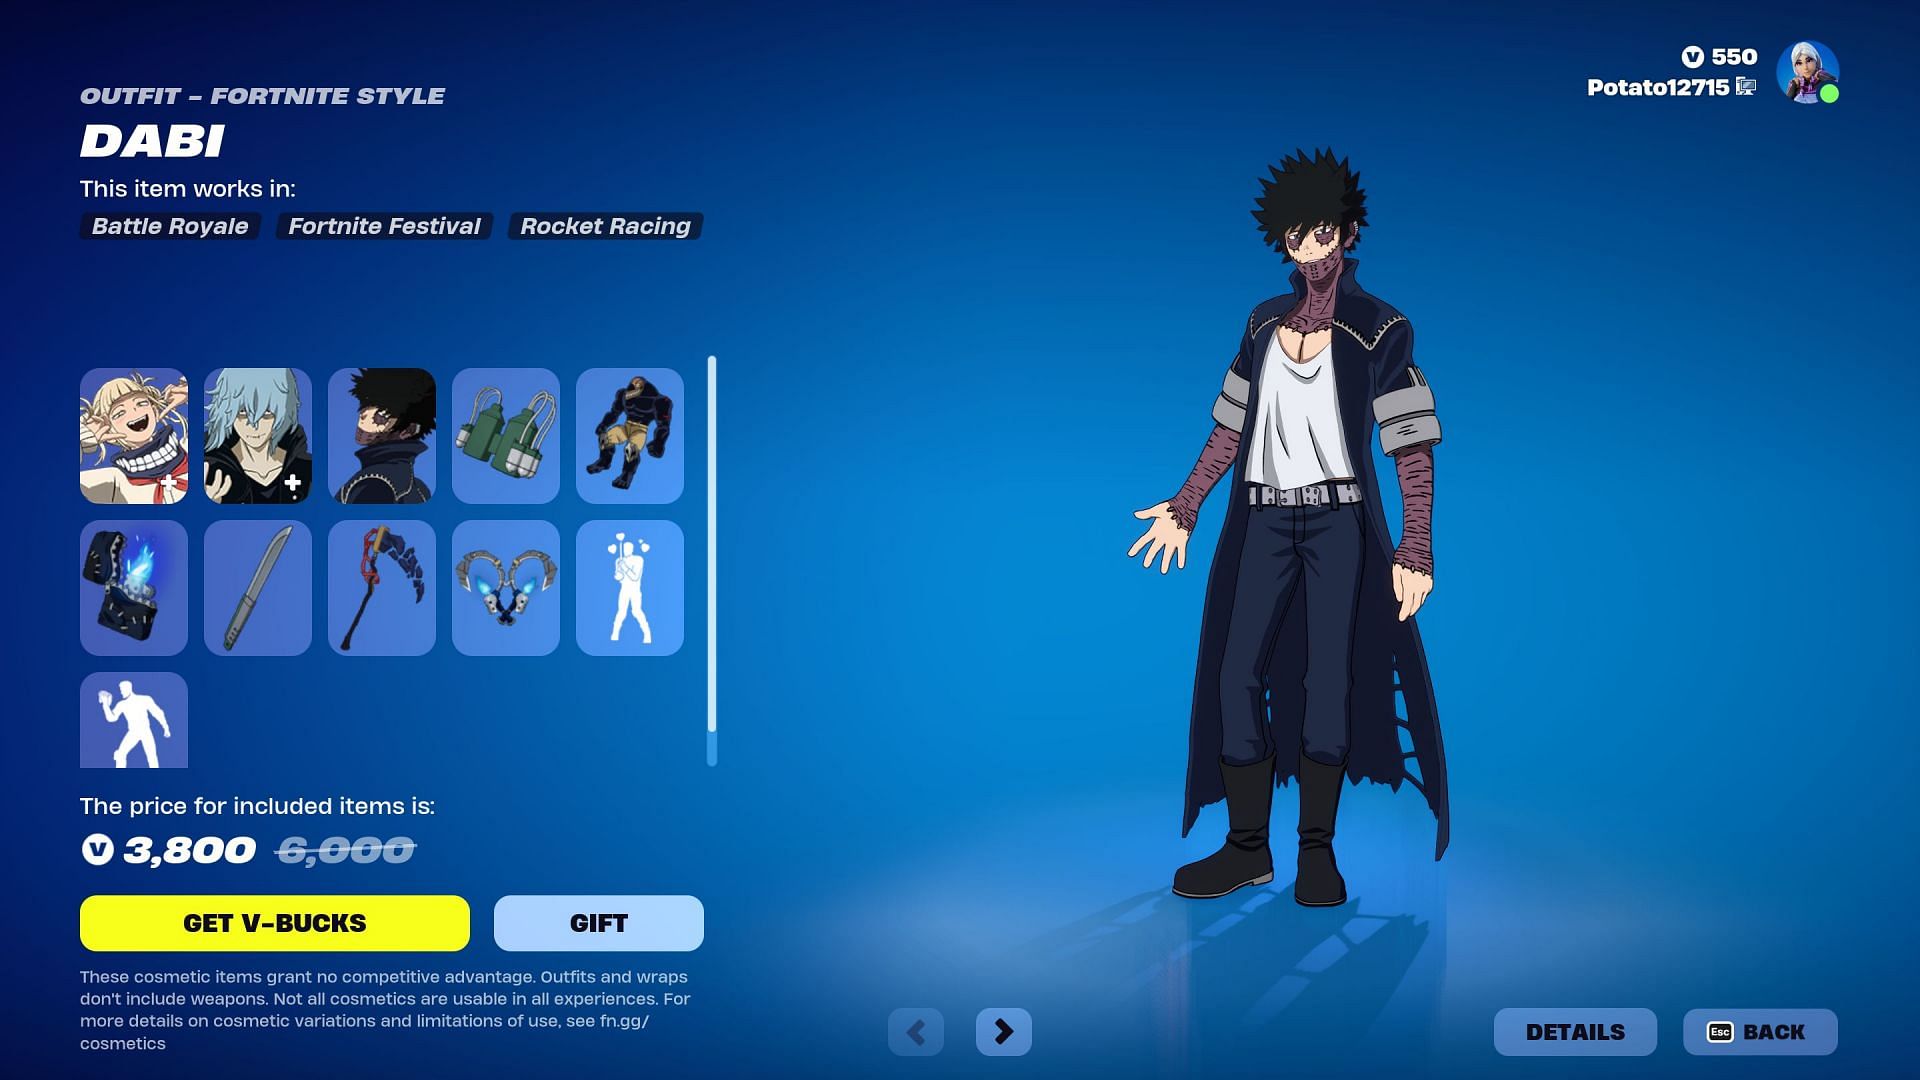 Himiko Toga, Tomura Shigaraki, and Dabi skins could be listed until Chapter 5 Season 2 ends (Image via Epic Games)